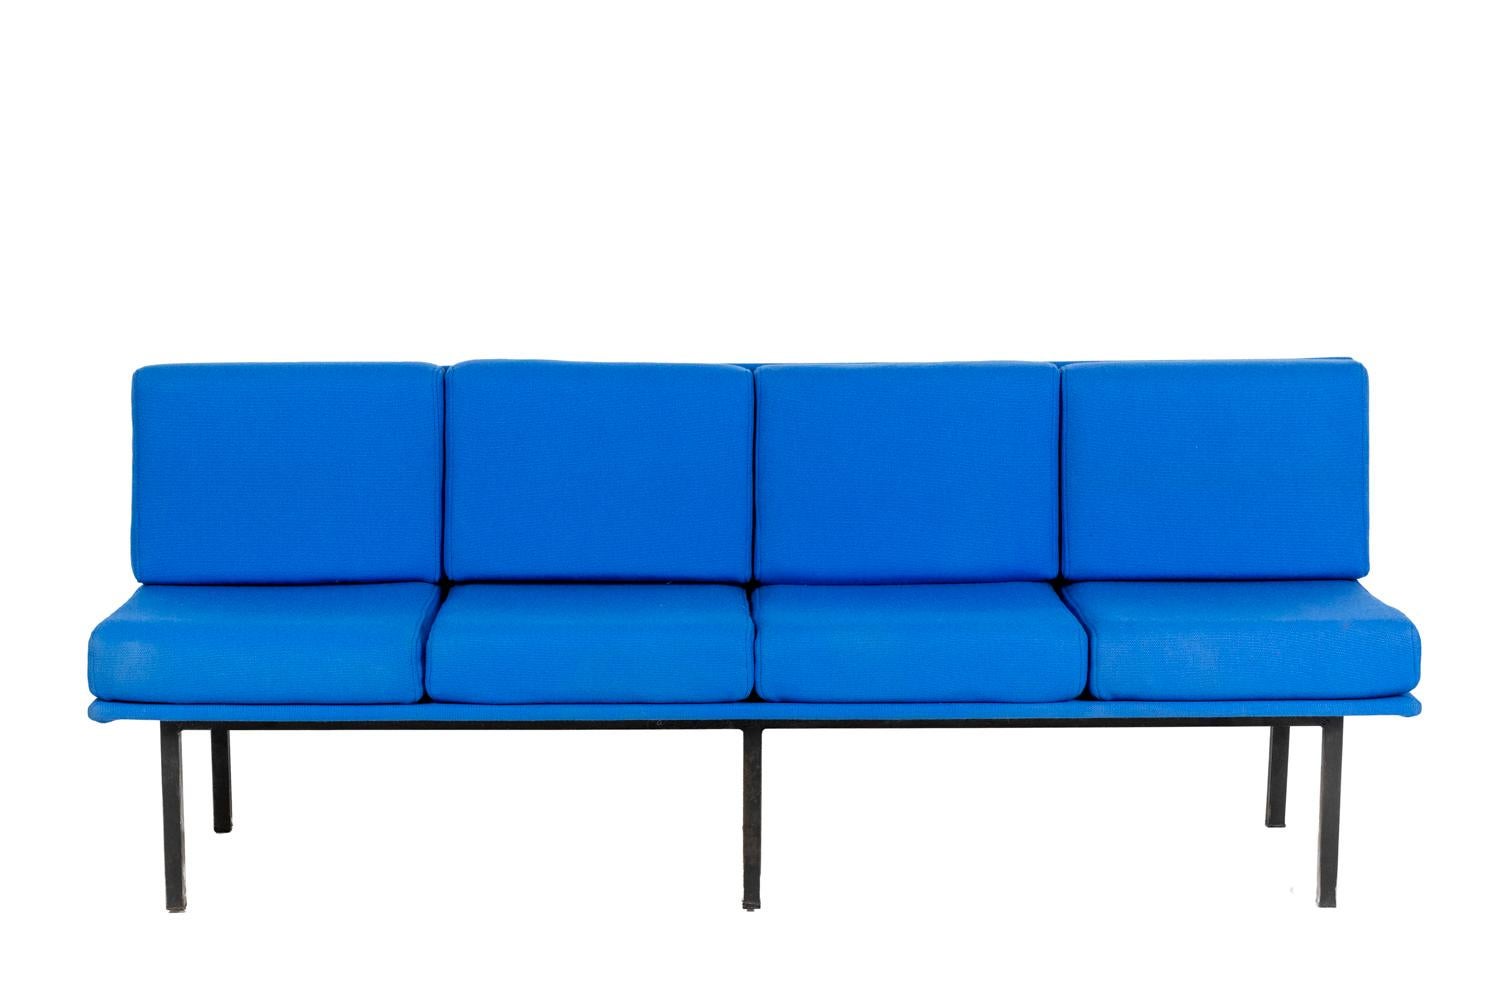 Bench with backrest, standing on a base, made up of six legs, in black lacquered metal. Blue color fabric.

French work realized in the 1960s.